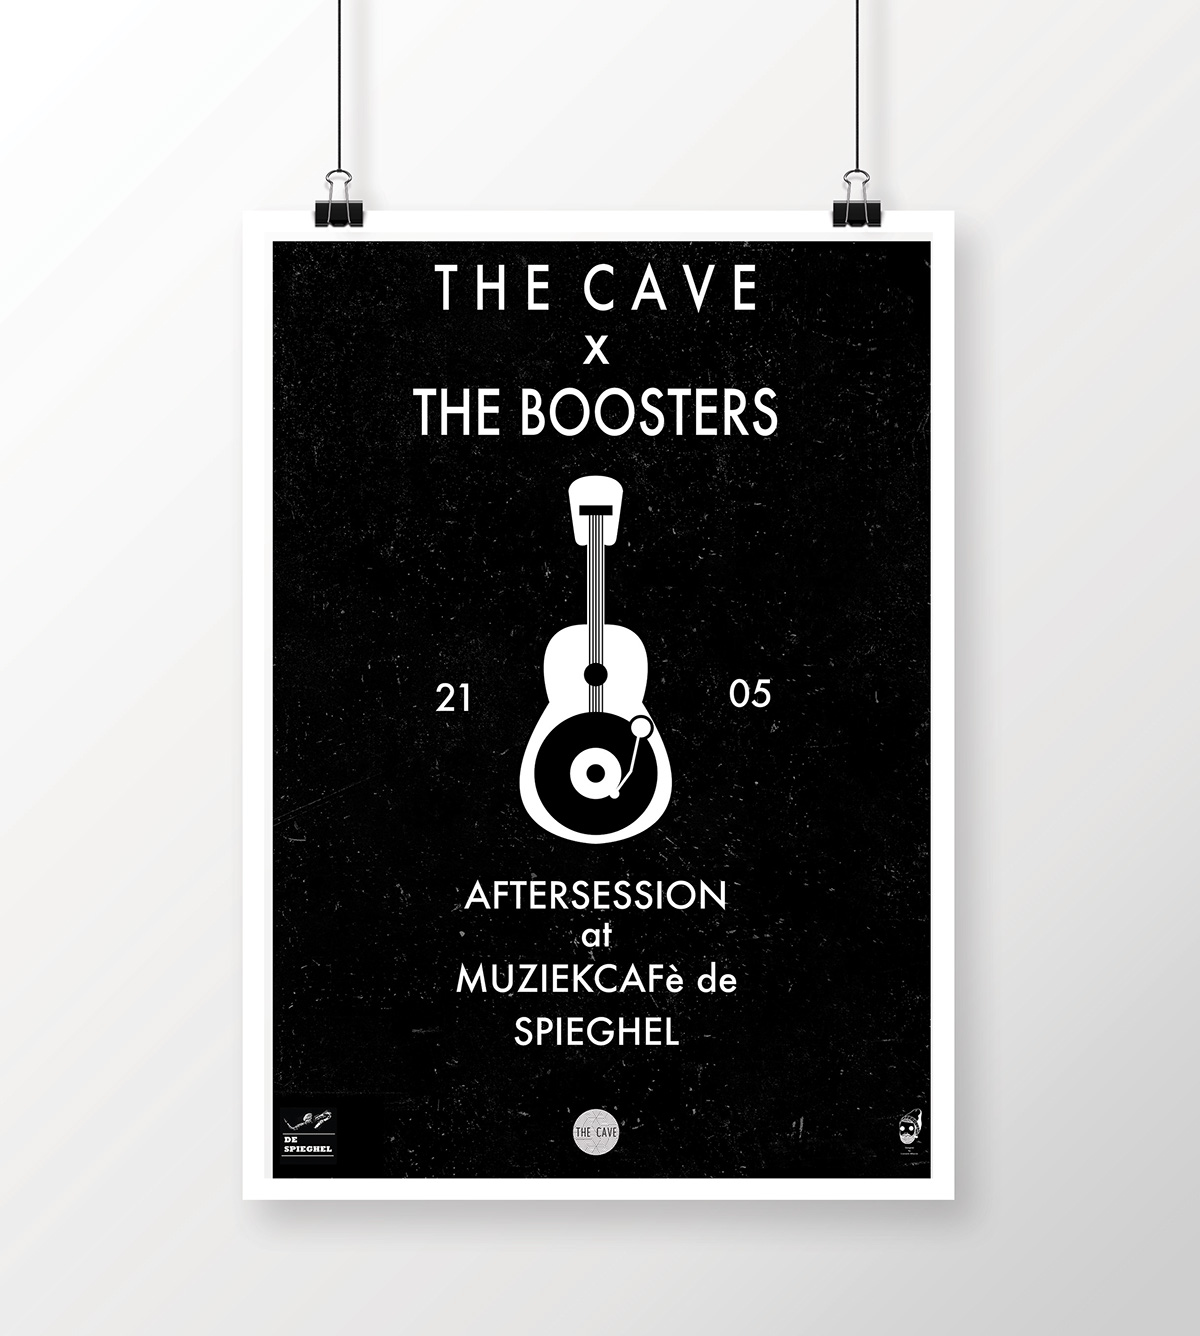 thecave techno vinyl theboosters indie party Event poster logo cover graphic Project Web